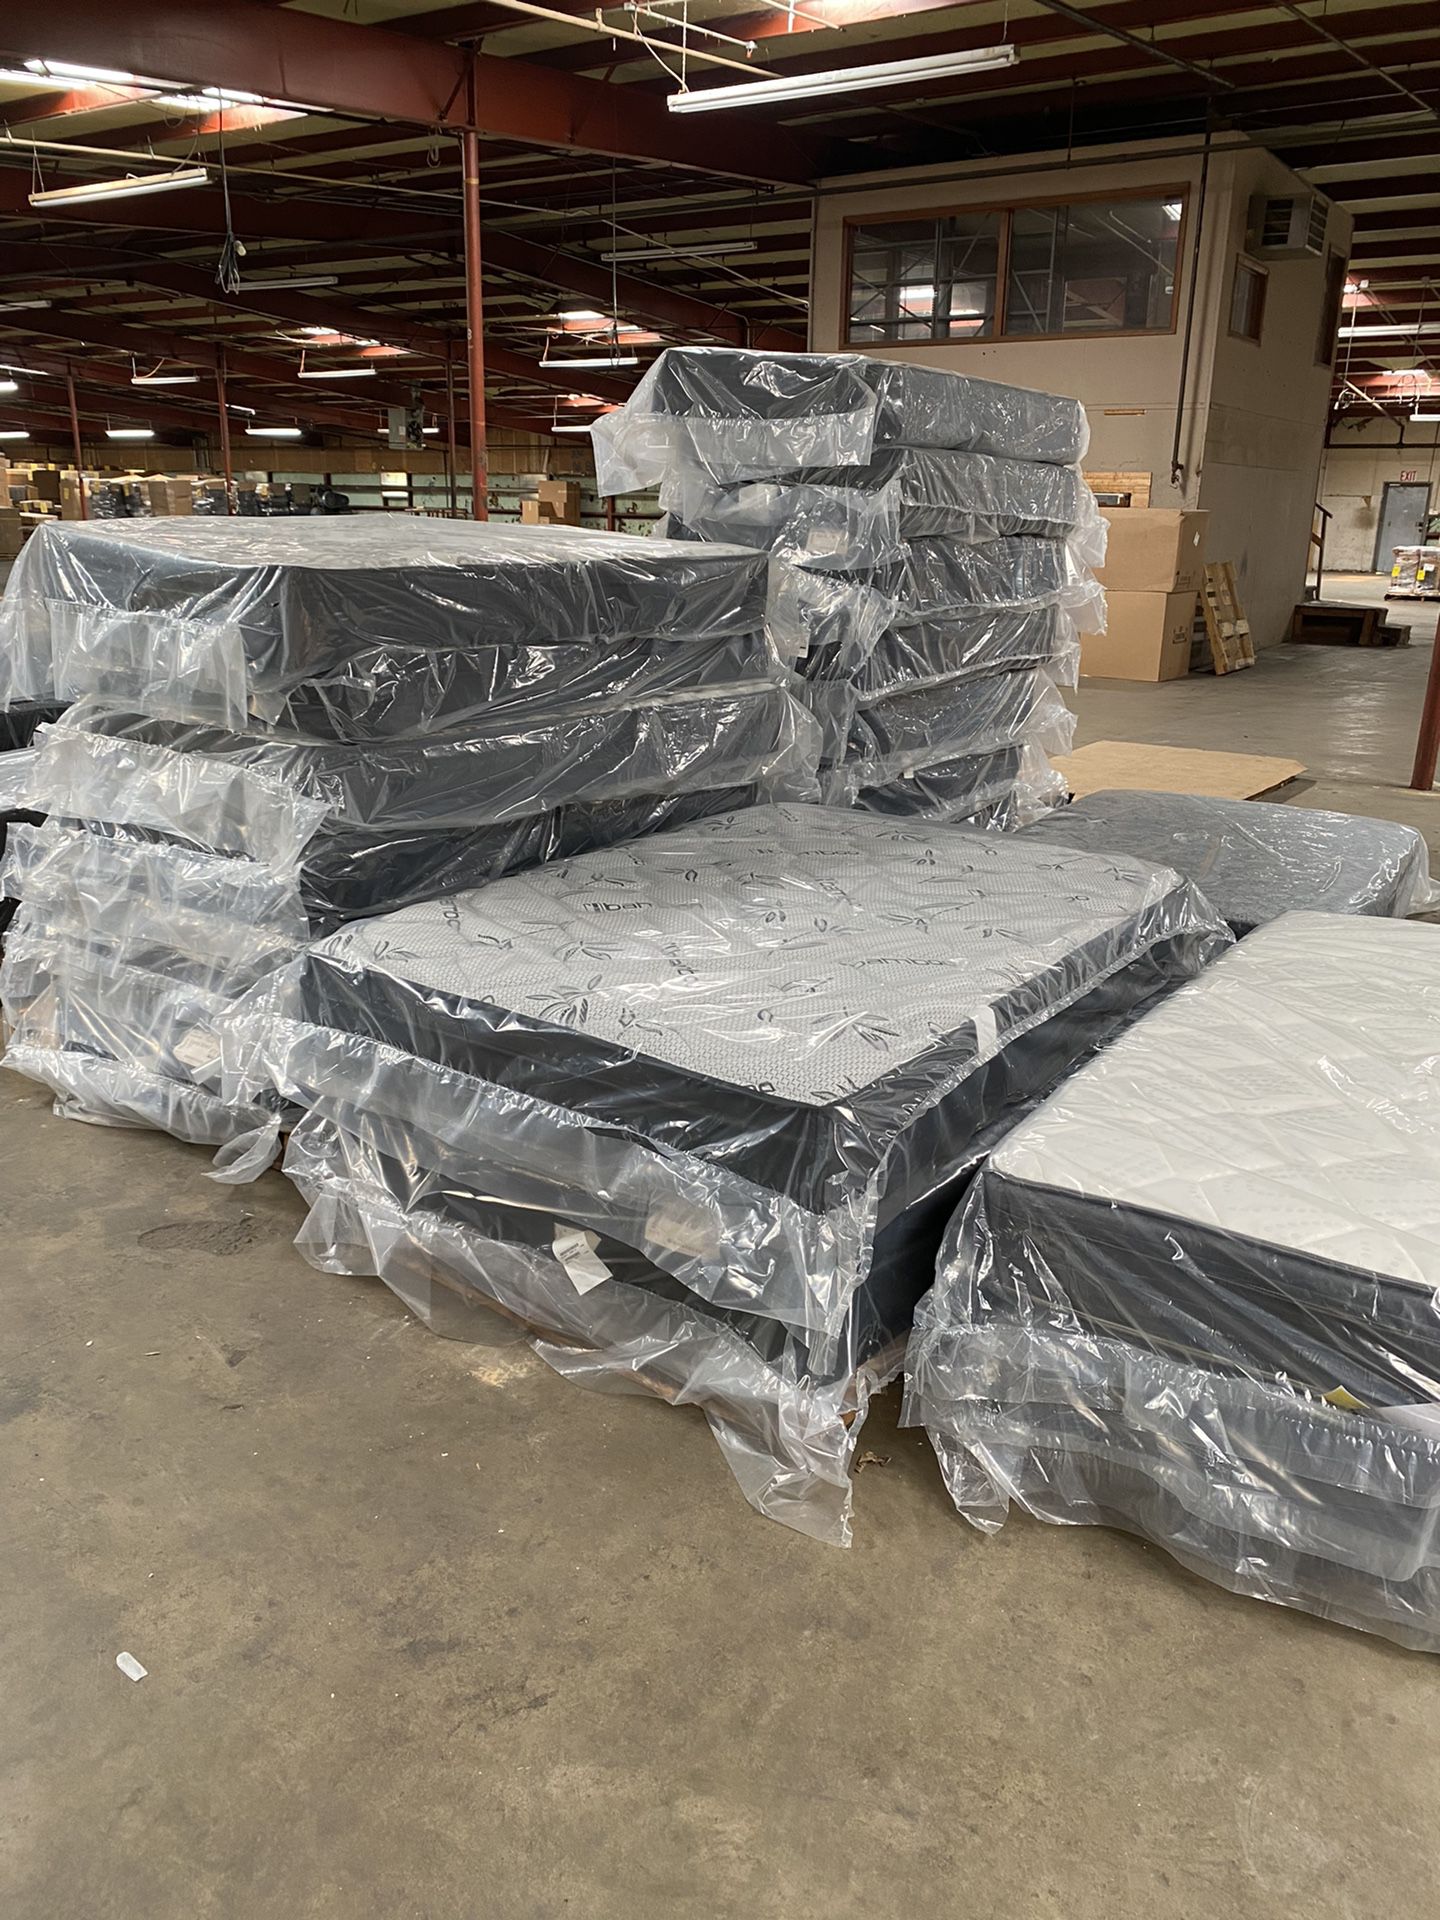 Brand New Full Size Mattresses In Stock And Ready To Go !!